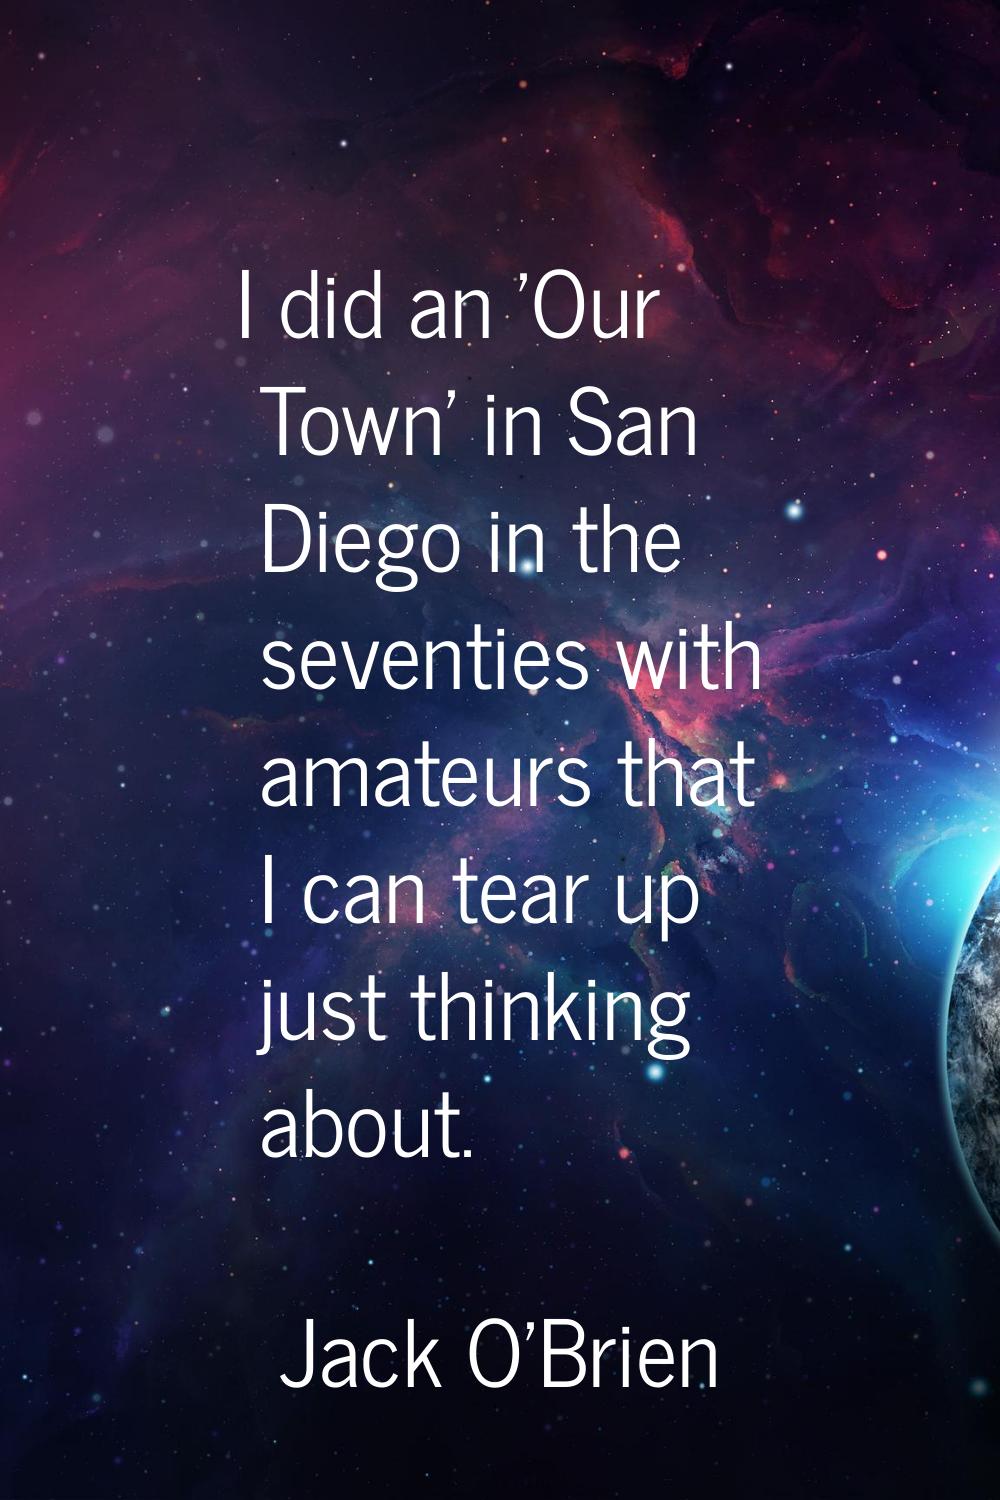 I did an 'Our Town' in San Diego in the seventies with amateurs that I can tear up just thinking ab